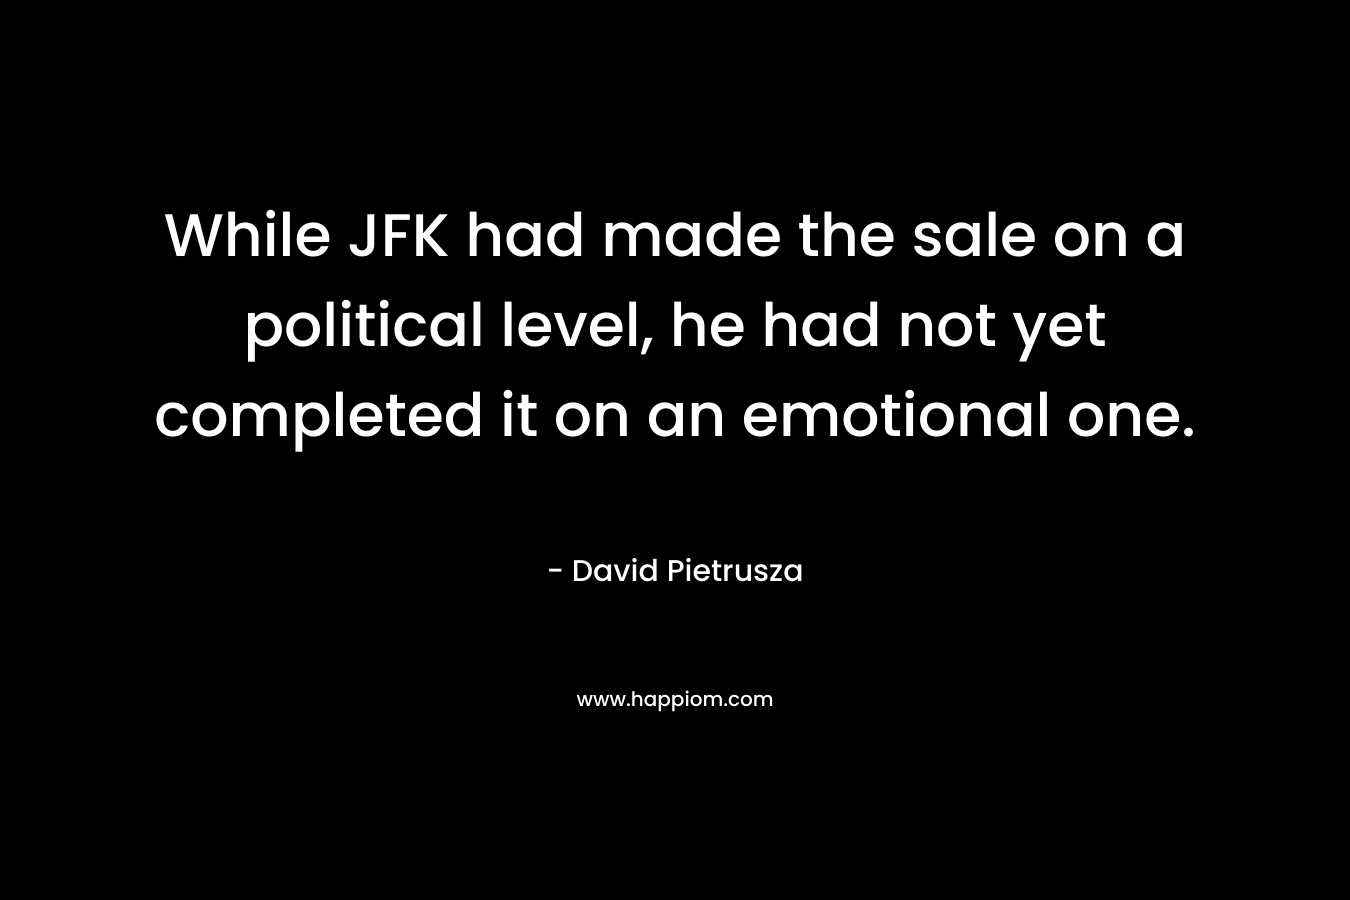 While JFK had made the sale on a political level, he had not yet completed it on an emotional one. – David Pietrusza